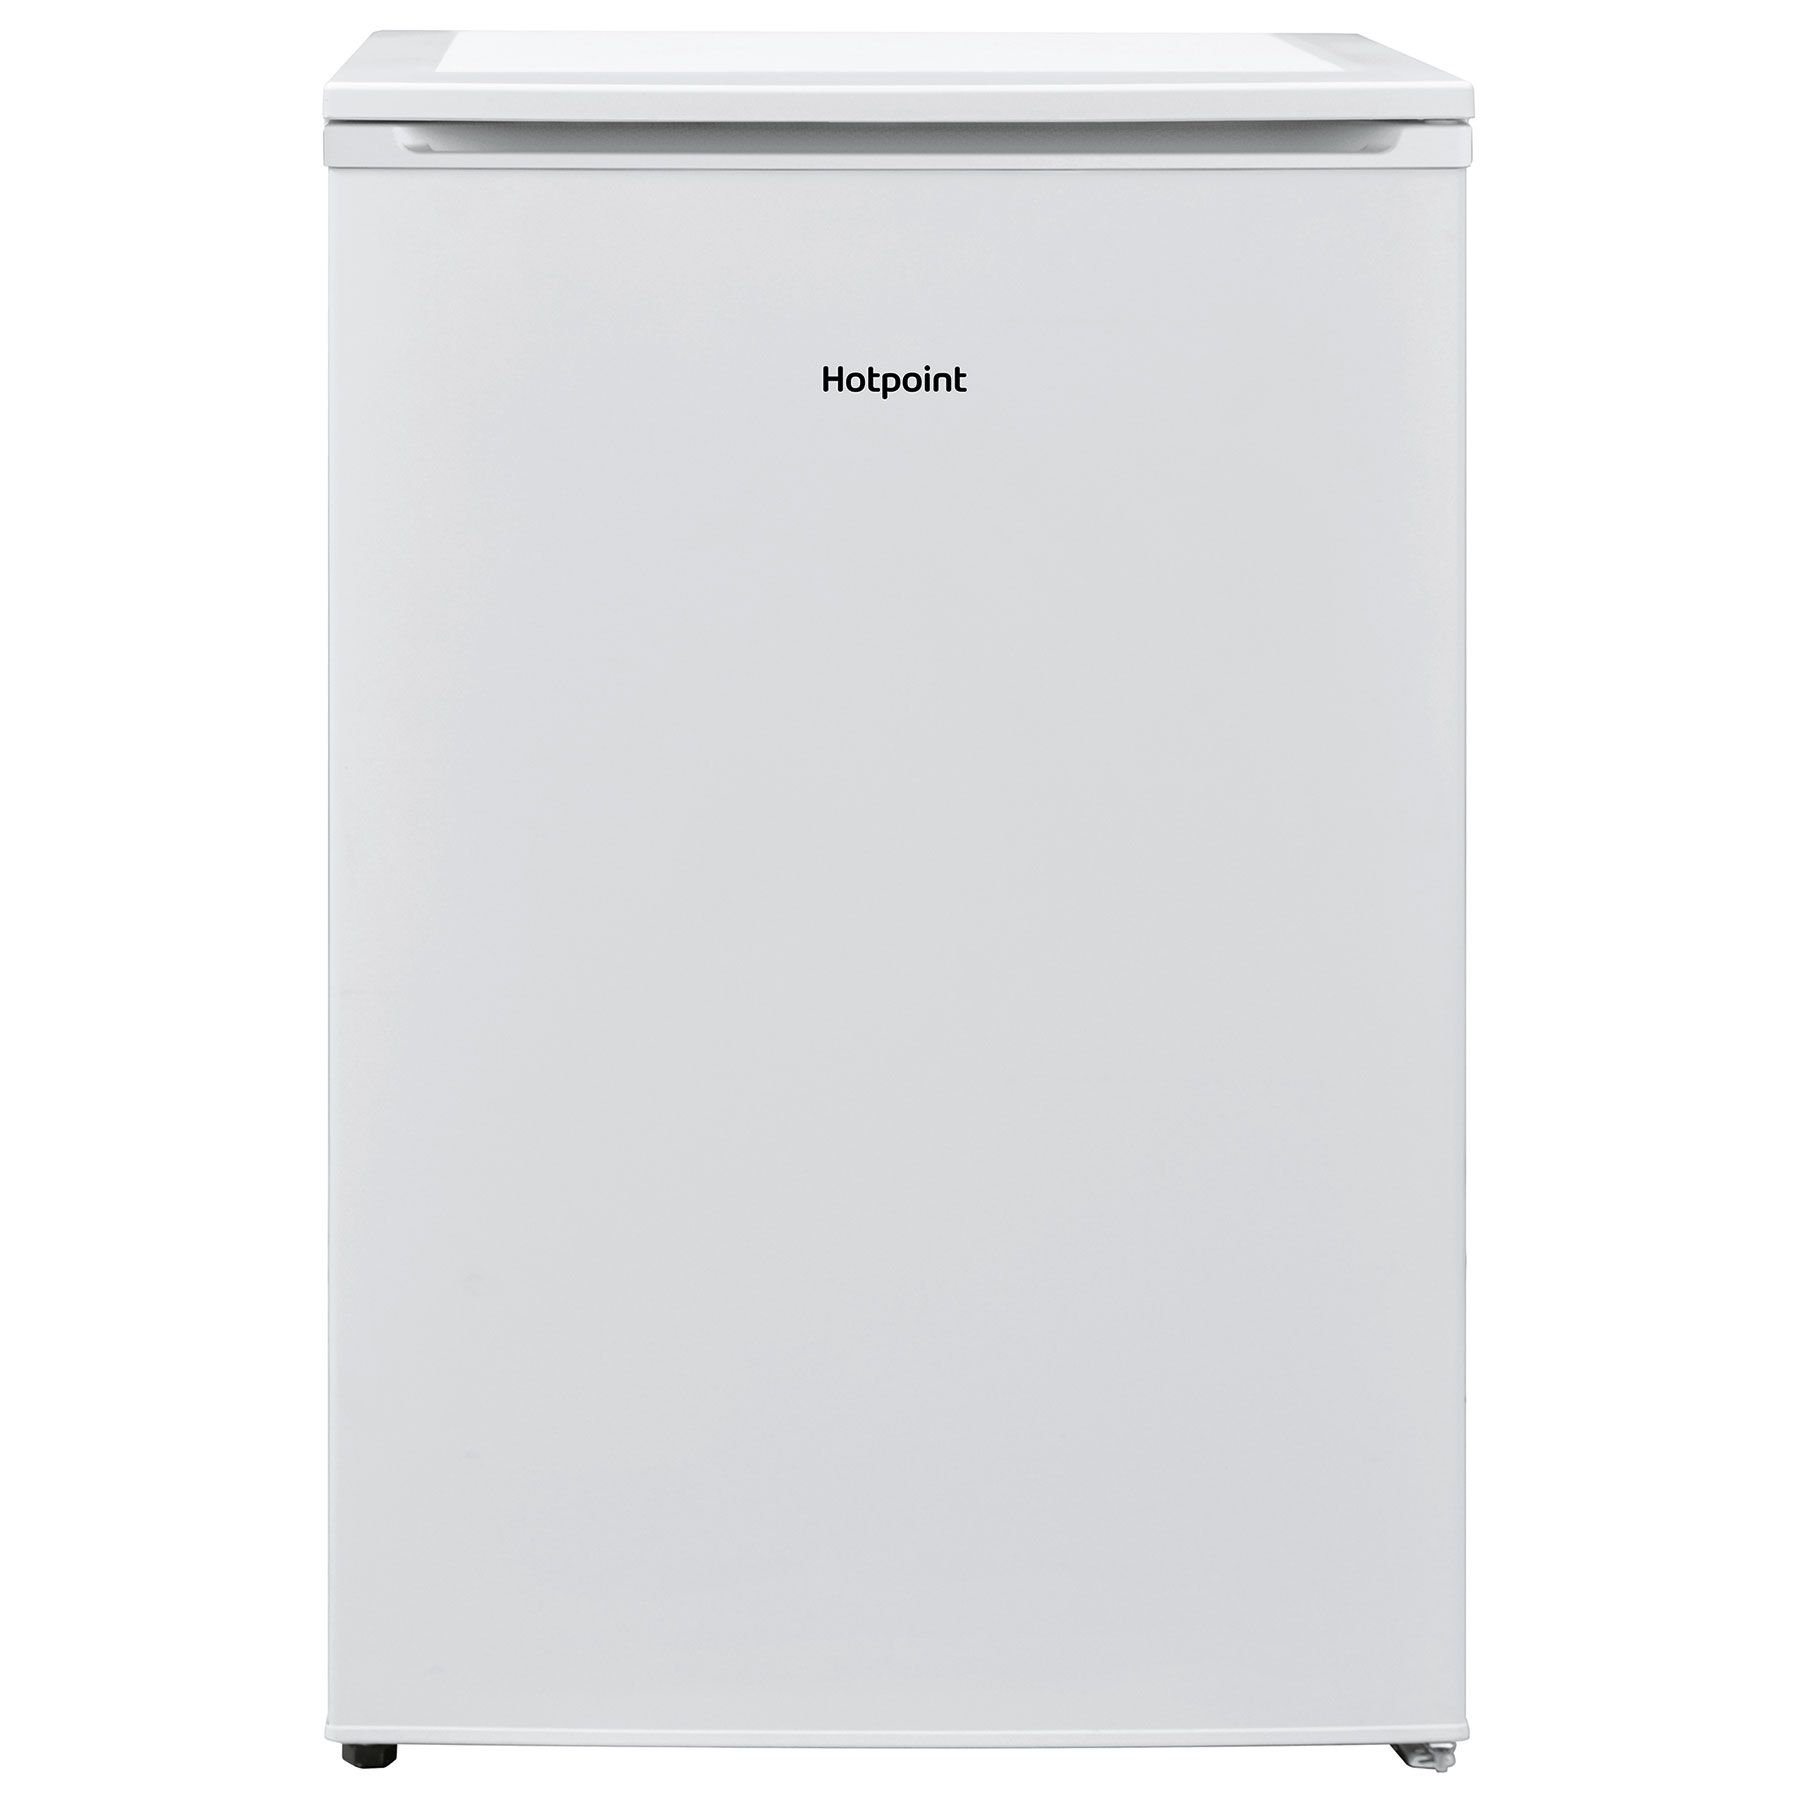 Image of Hotpoint H55RM1120W 55cm Undercounter Larder Fridge in White E Rated 1